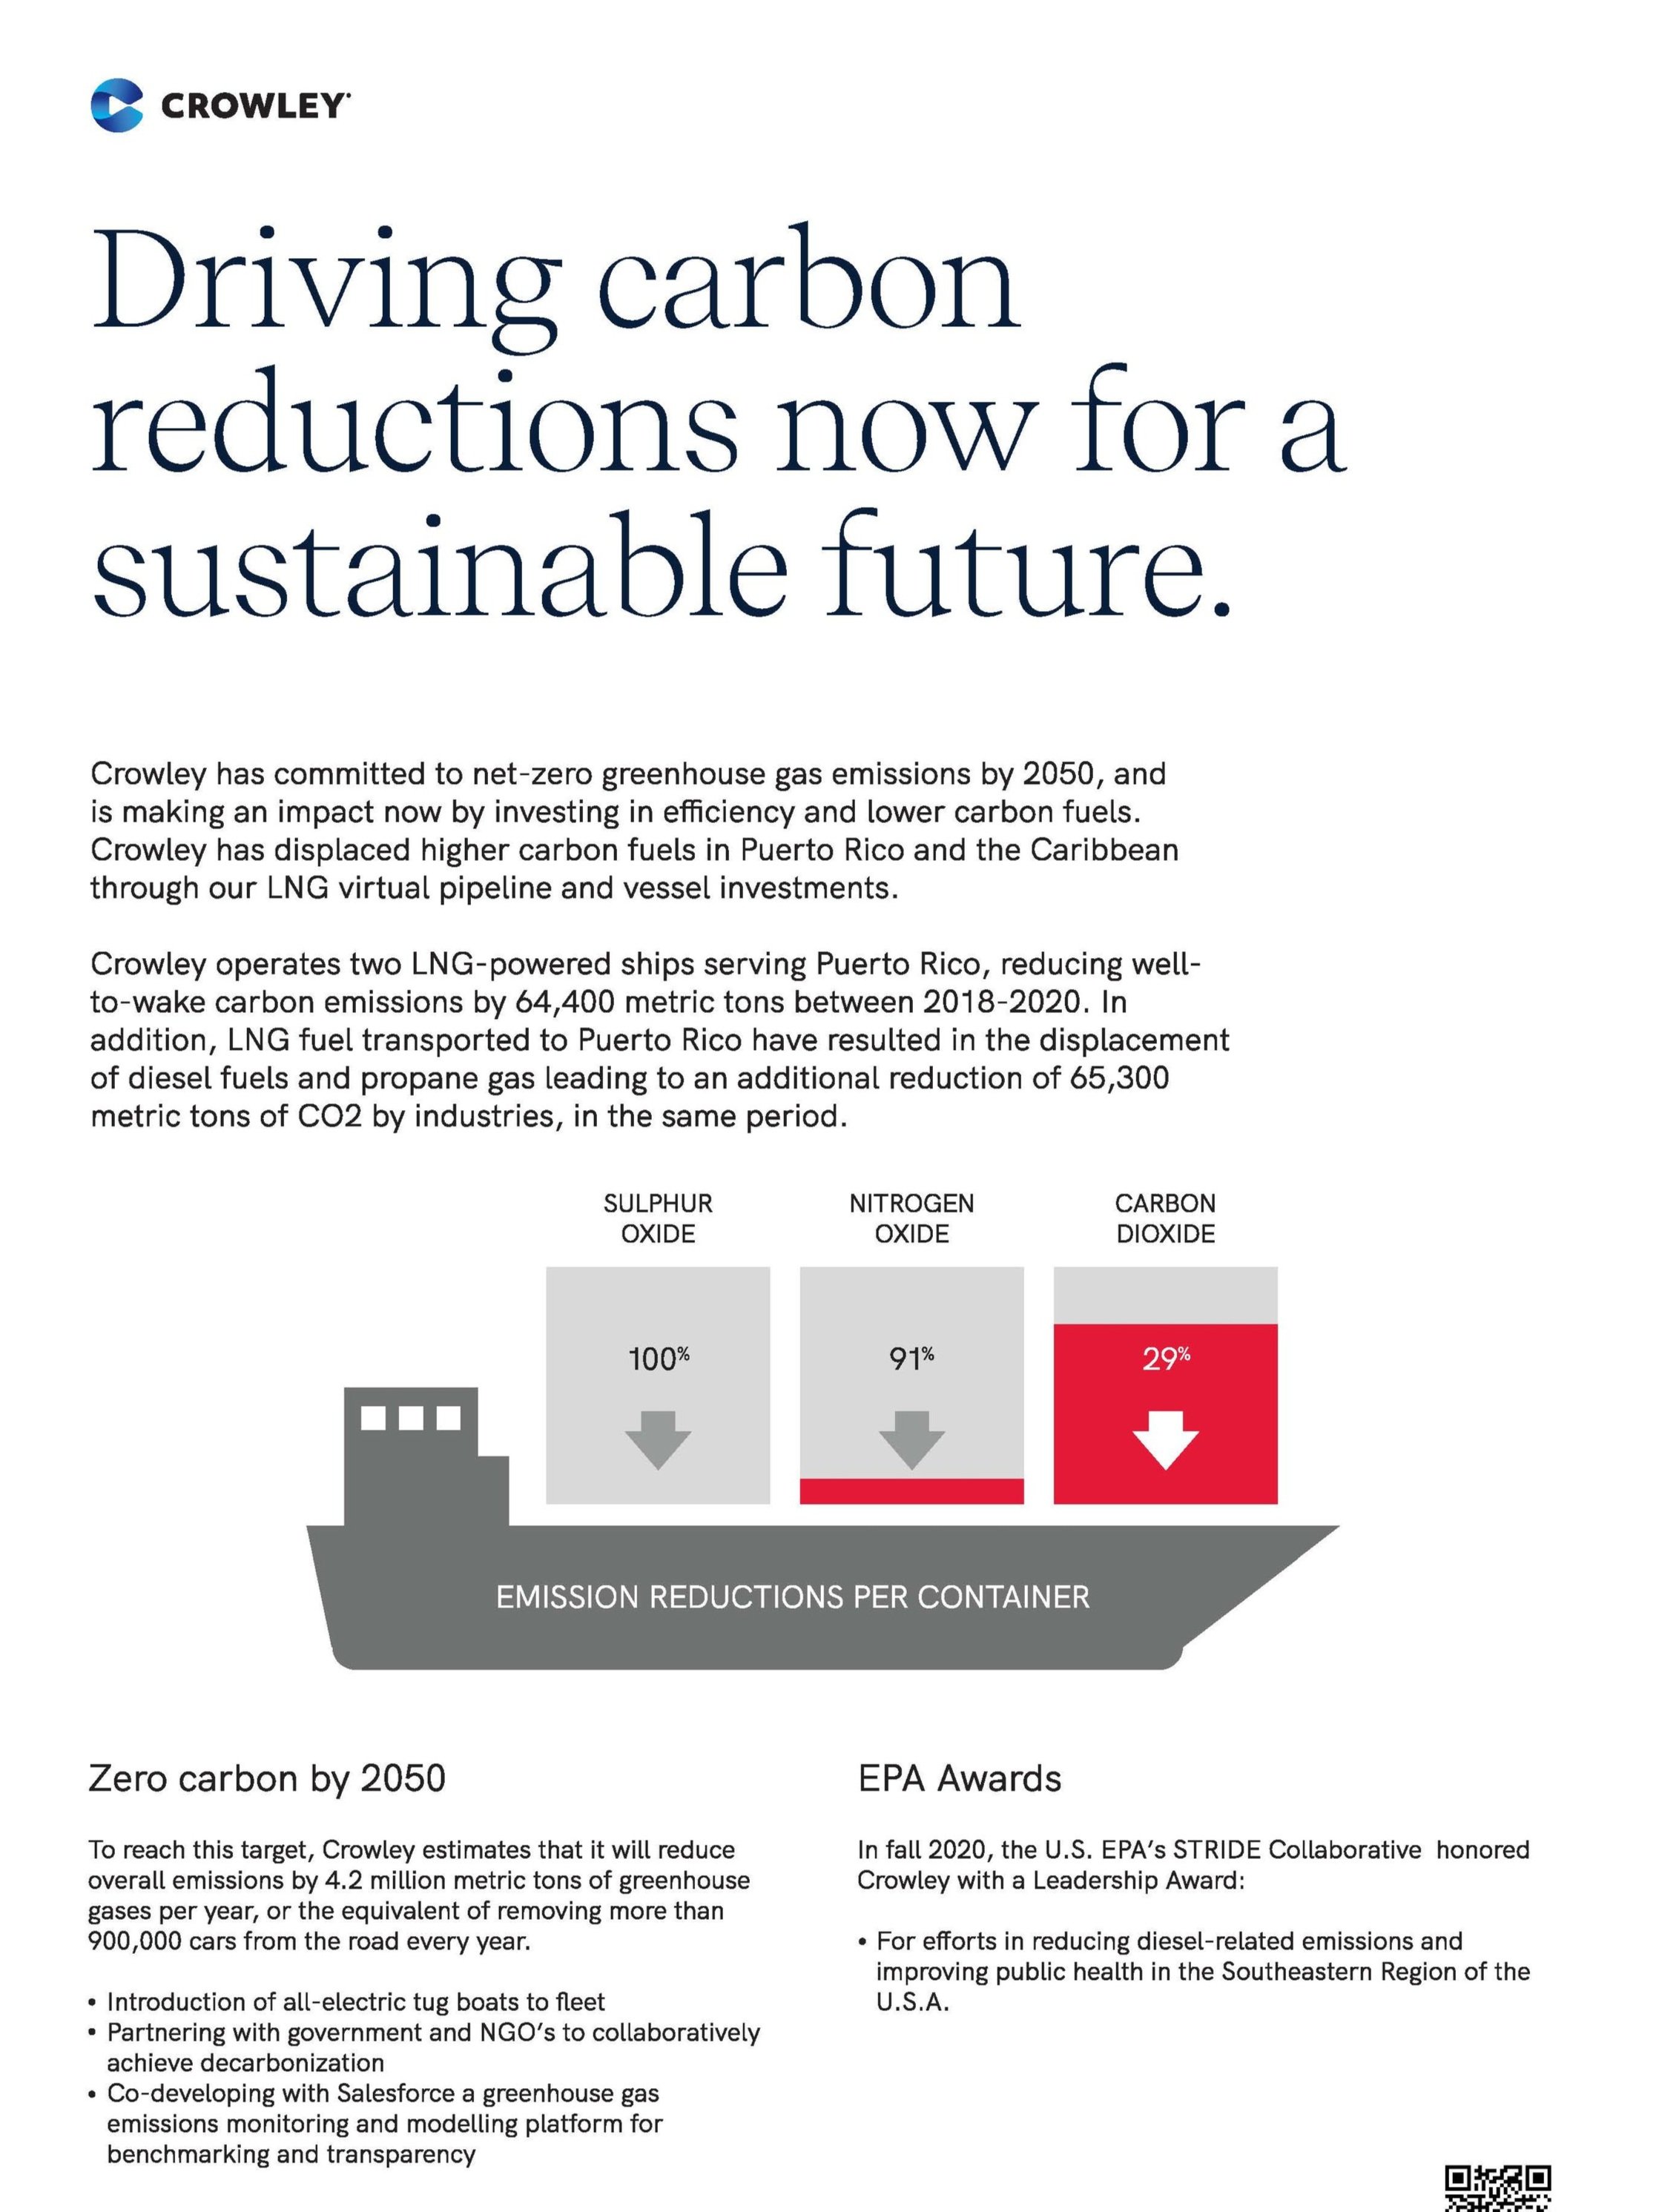 Driving carbon reductions now for a sustainable future